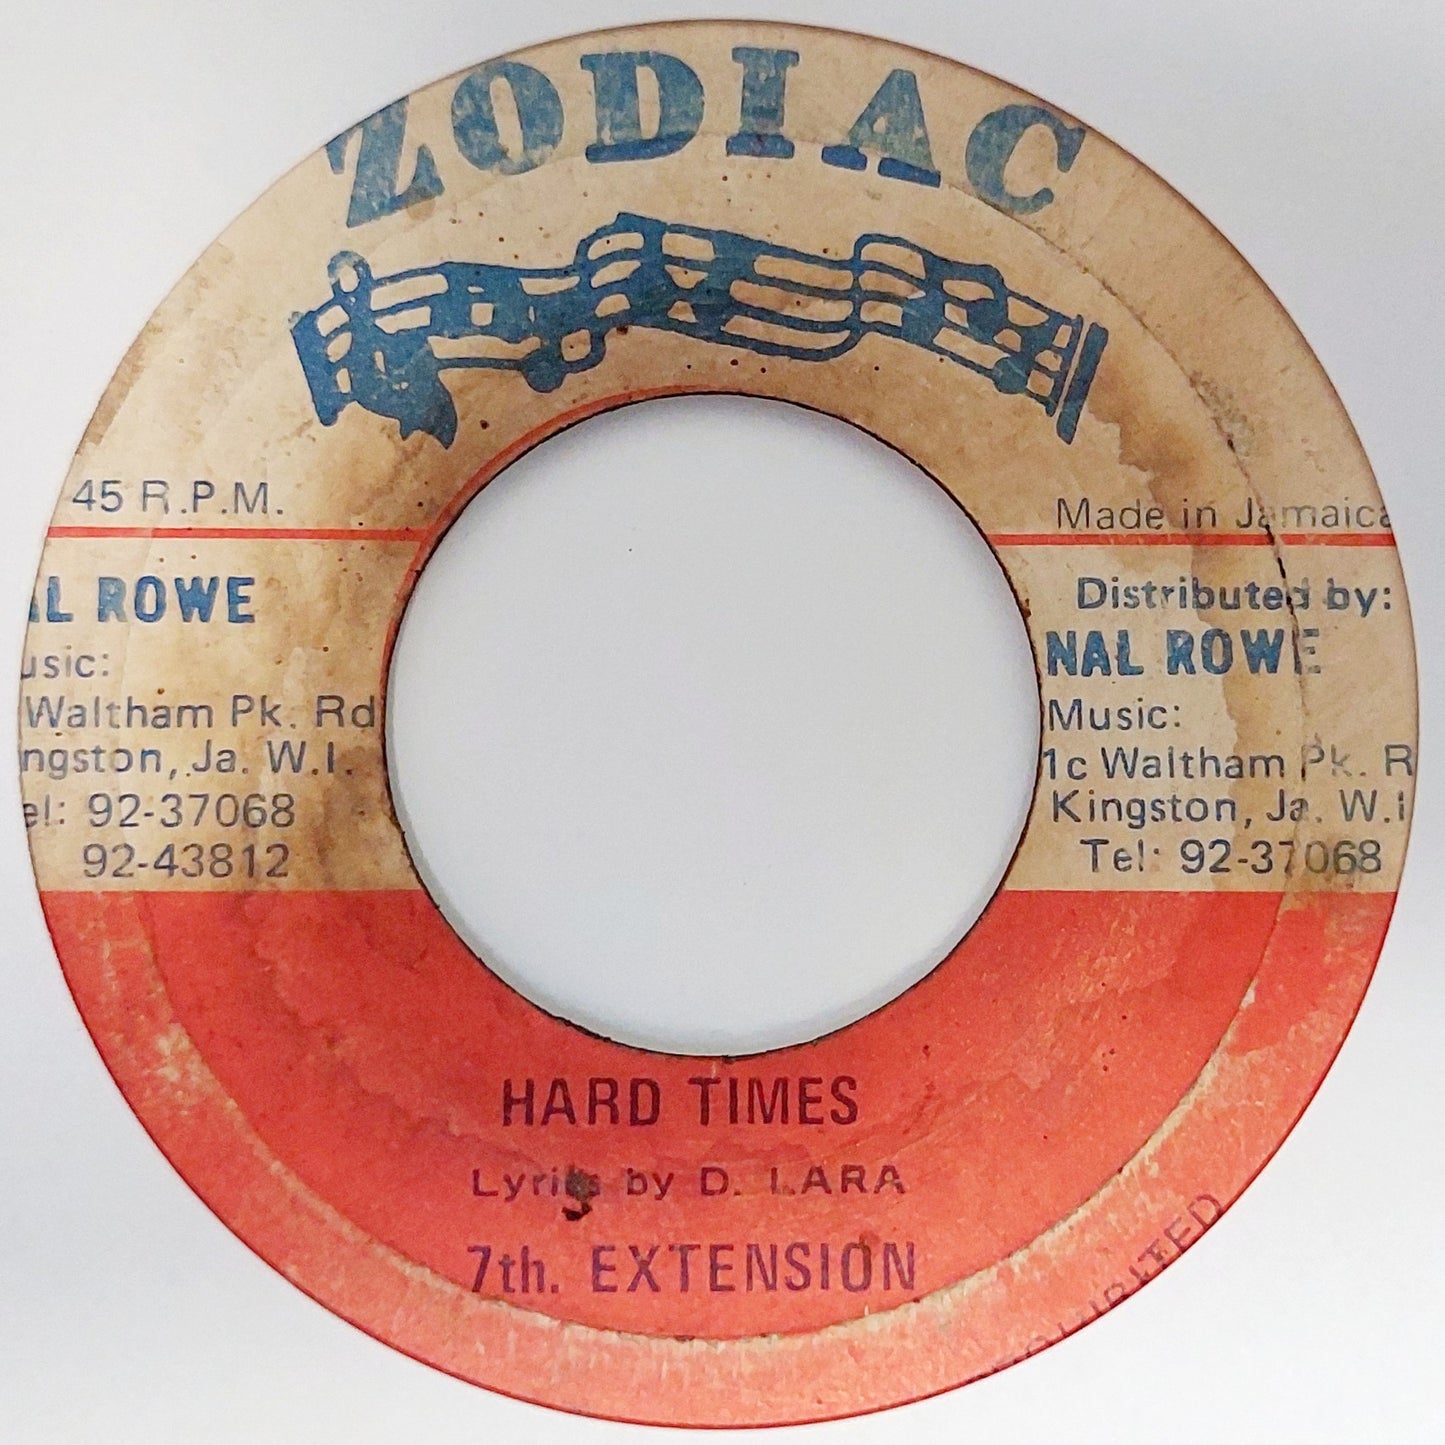 7th. Extension - Hard Times